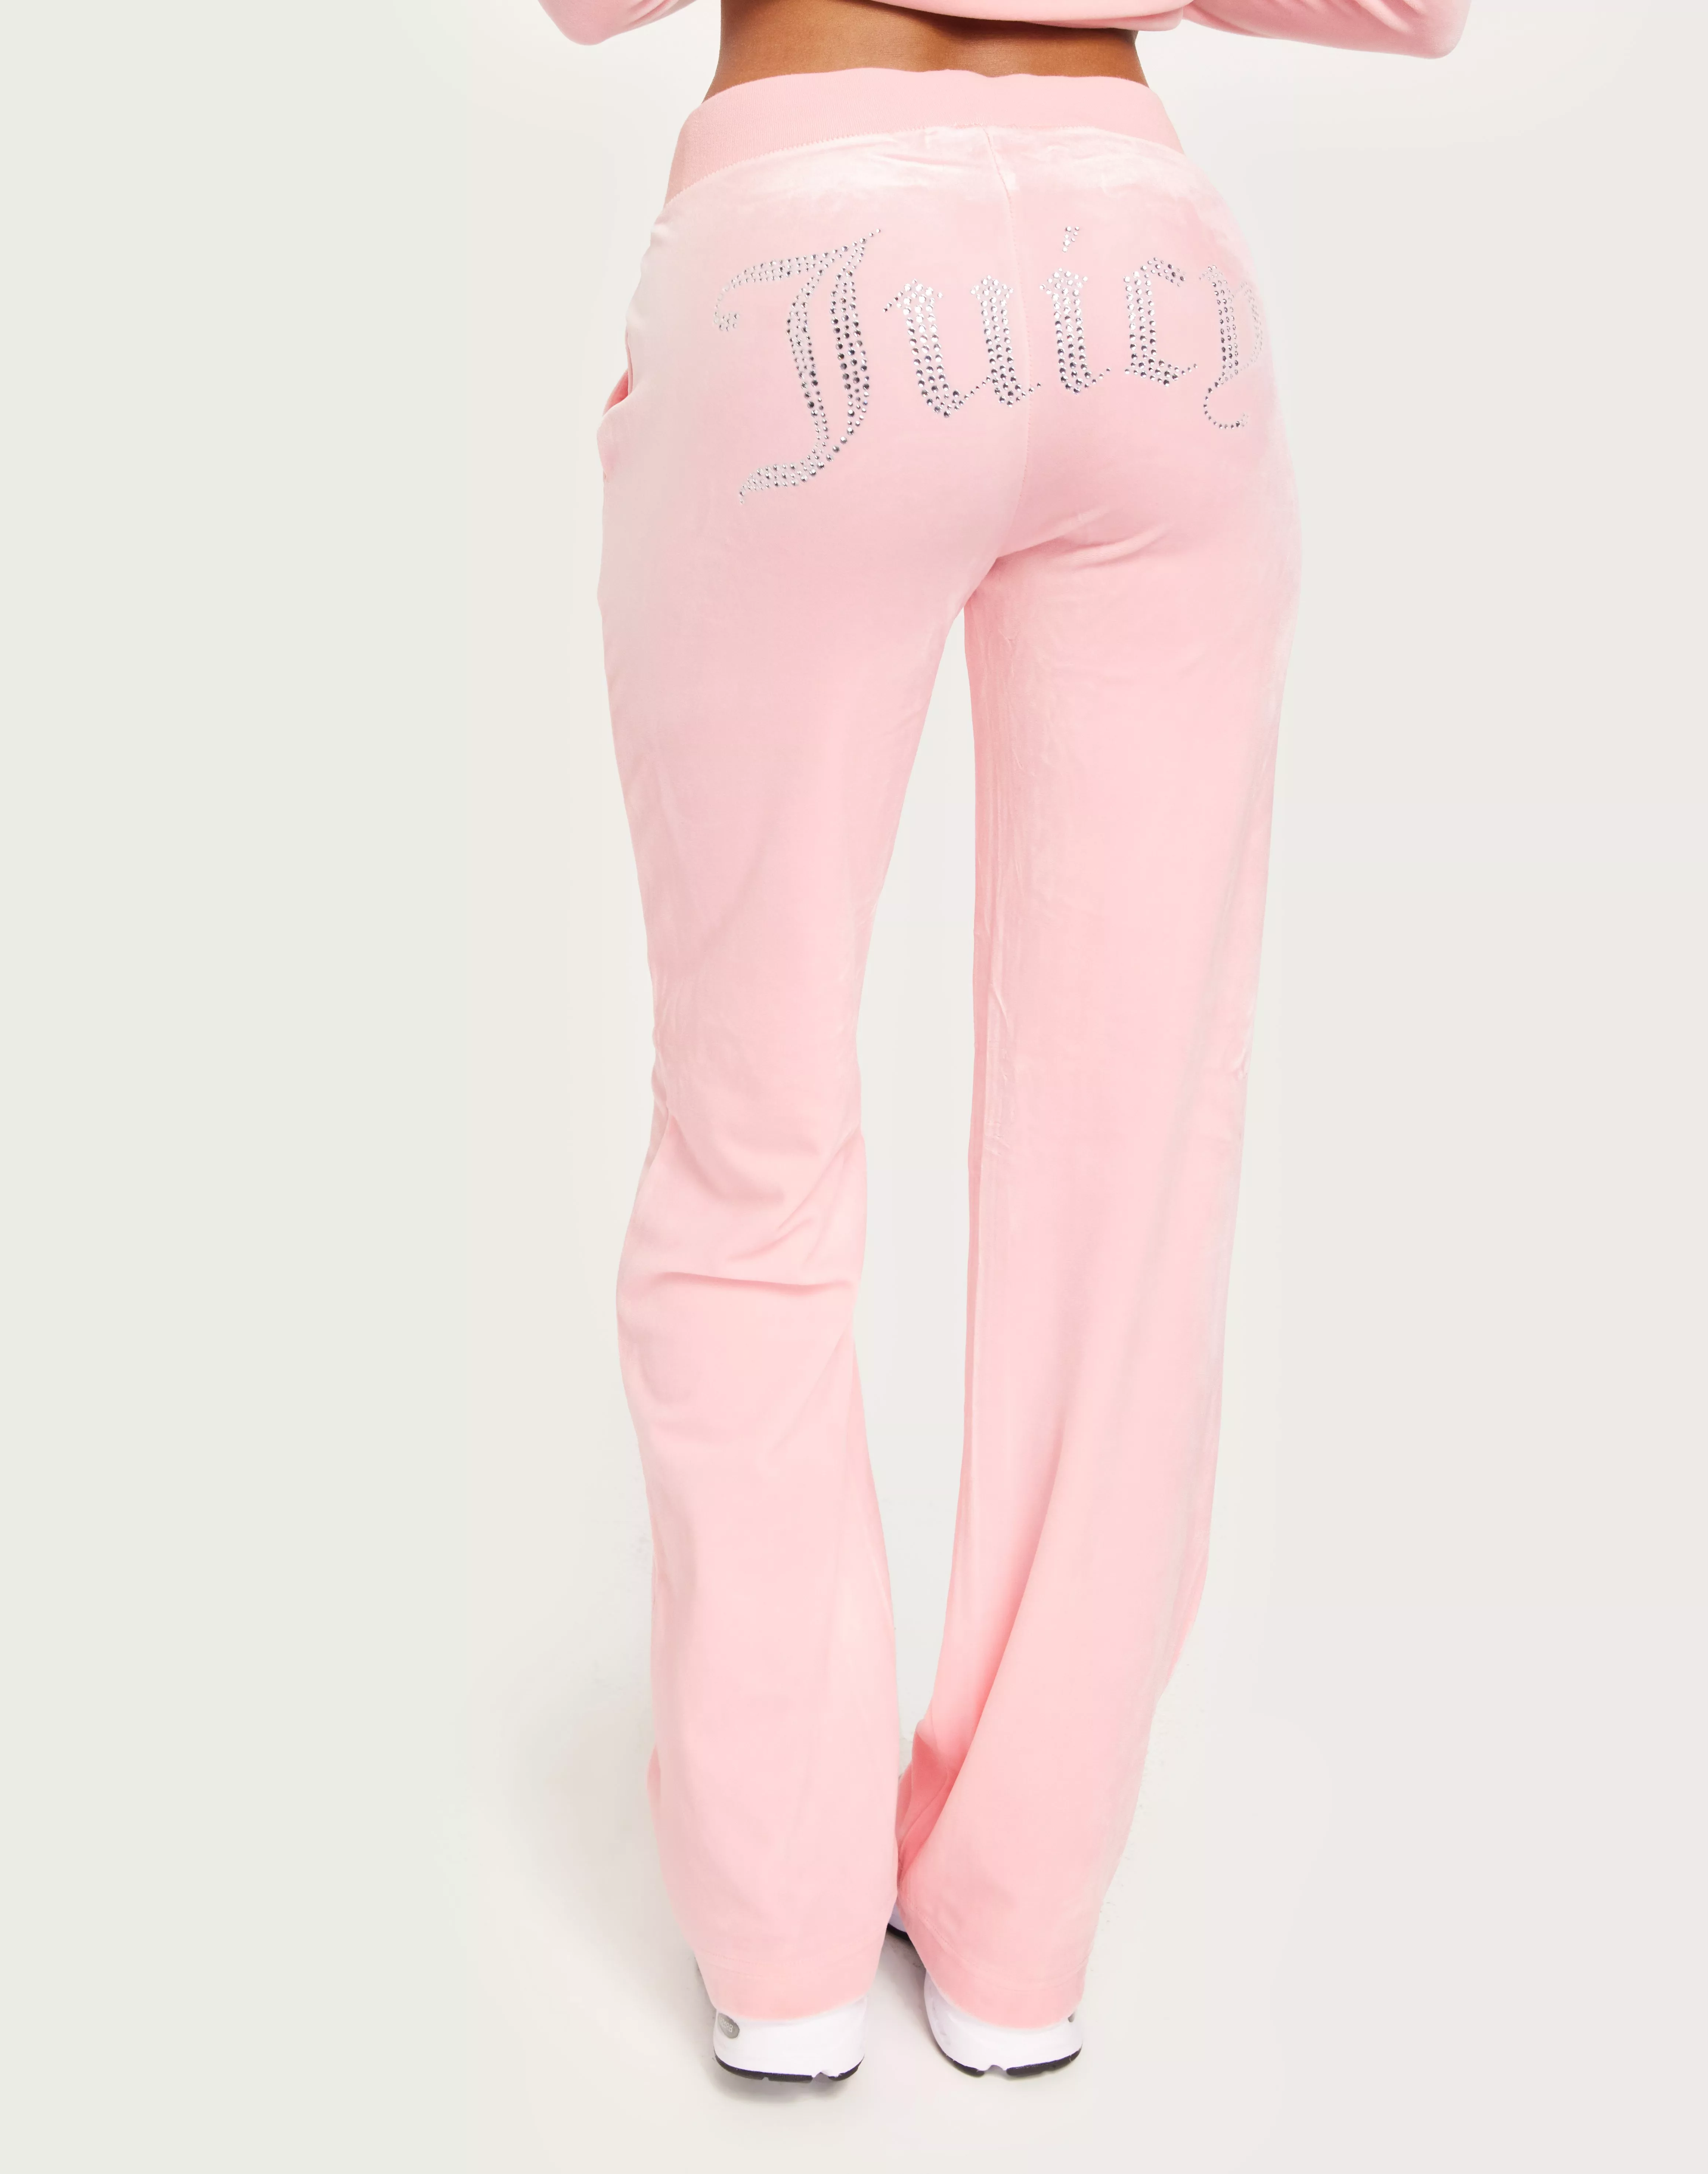 Juicy Couture Choose Juicy Velour Tracksuit Pants in Hot Pink in